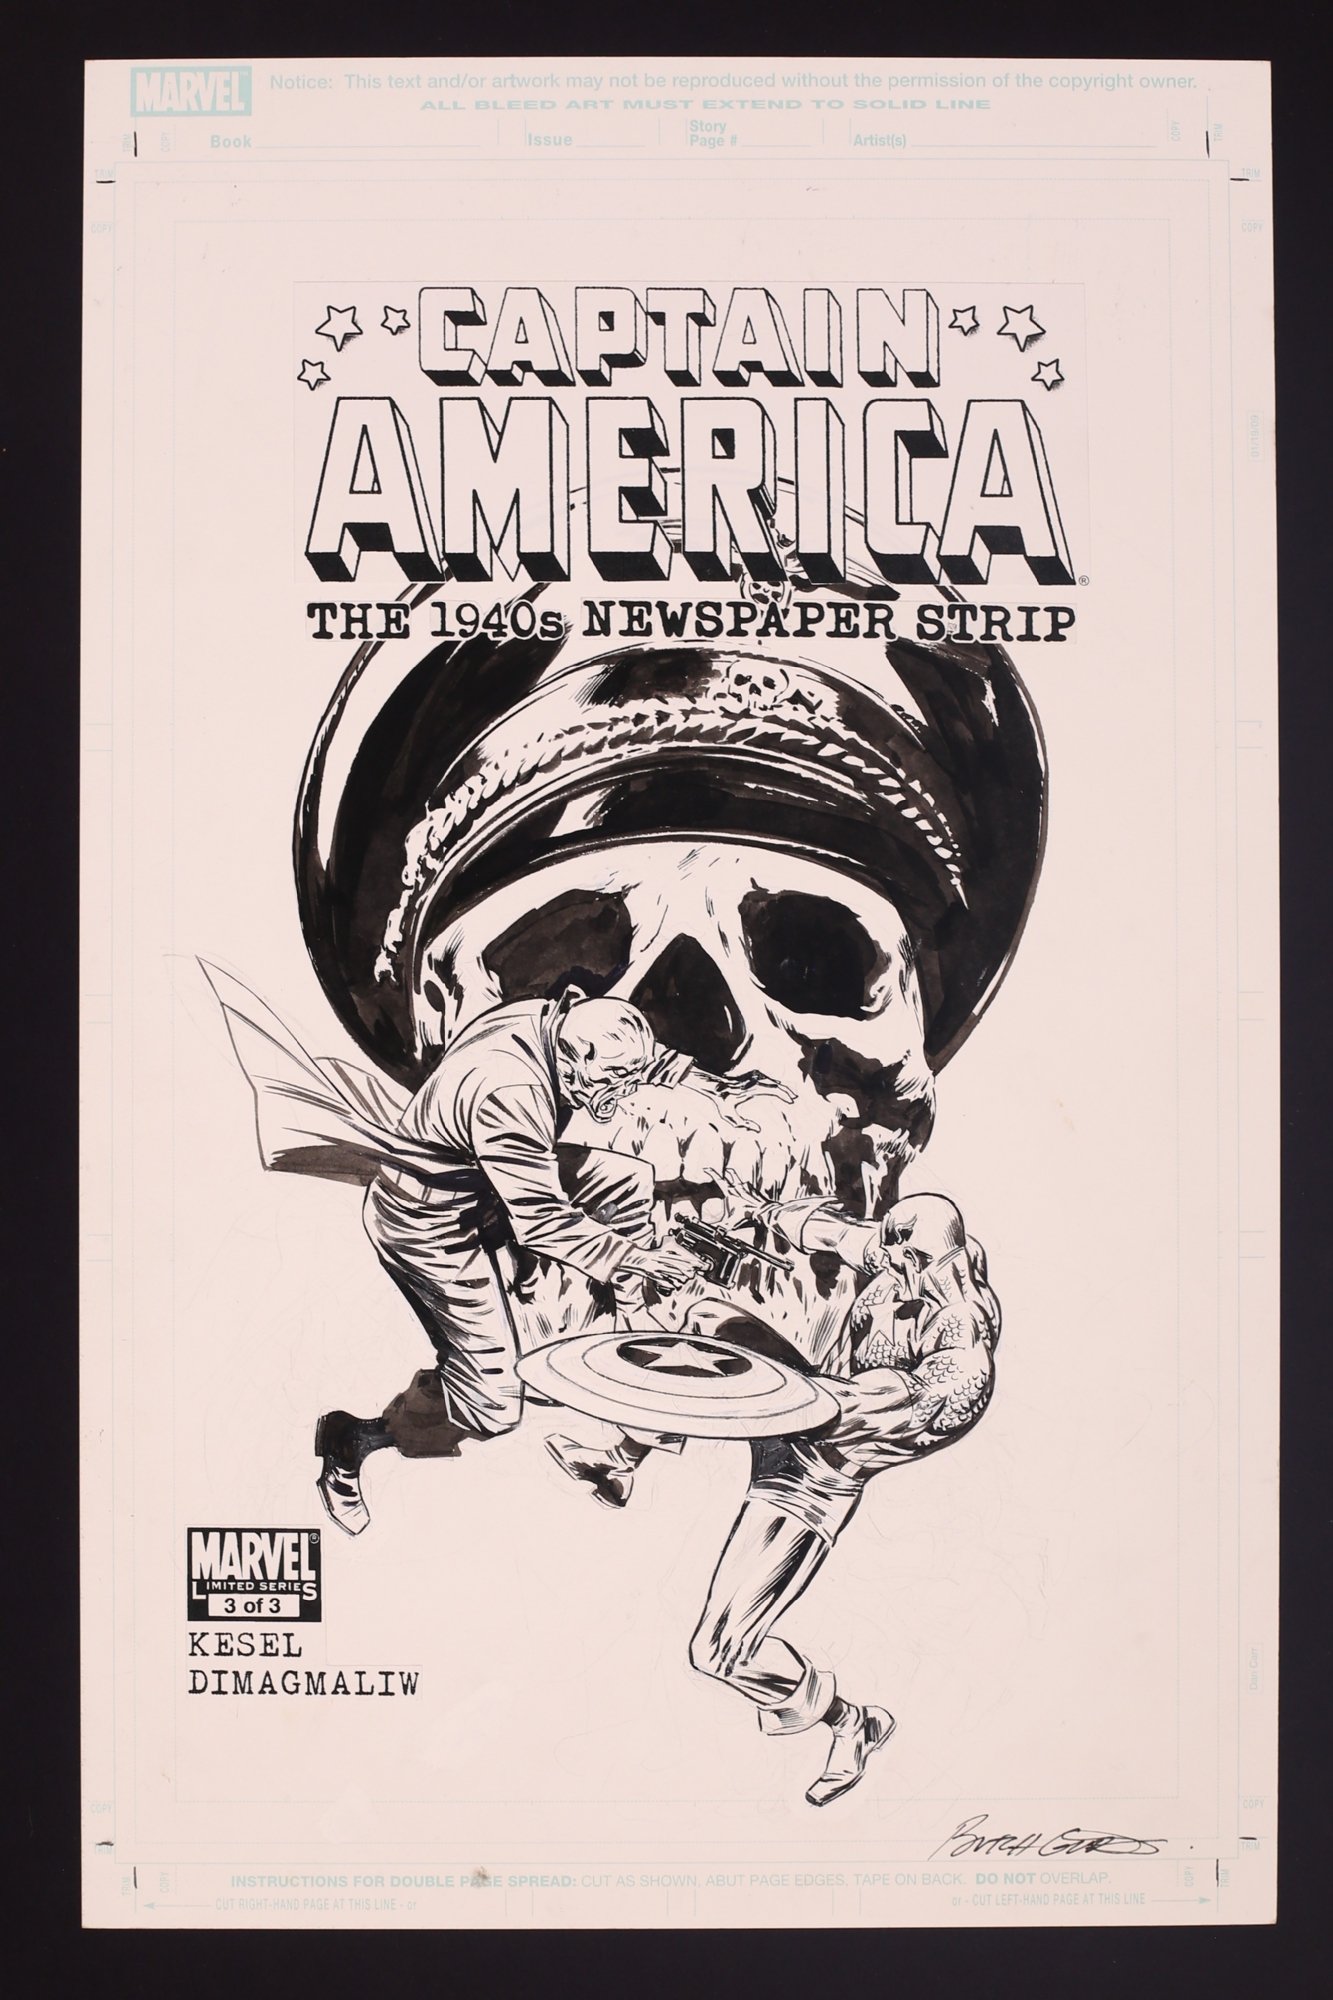 Captain America The 1940s Newspaper Strip #3 Cover (2010) by Butch 